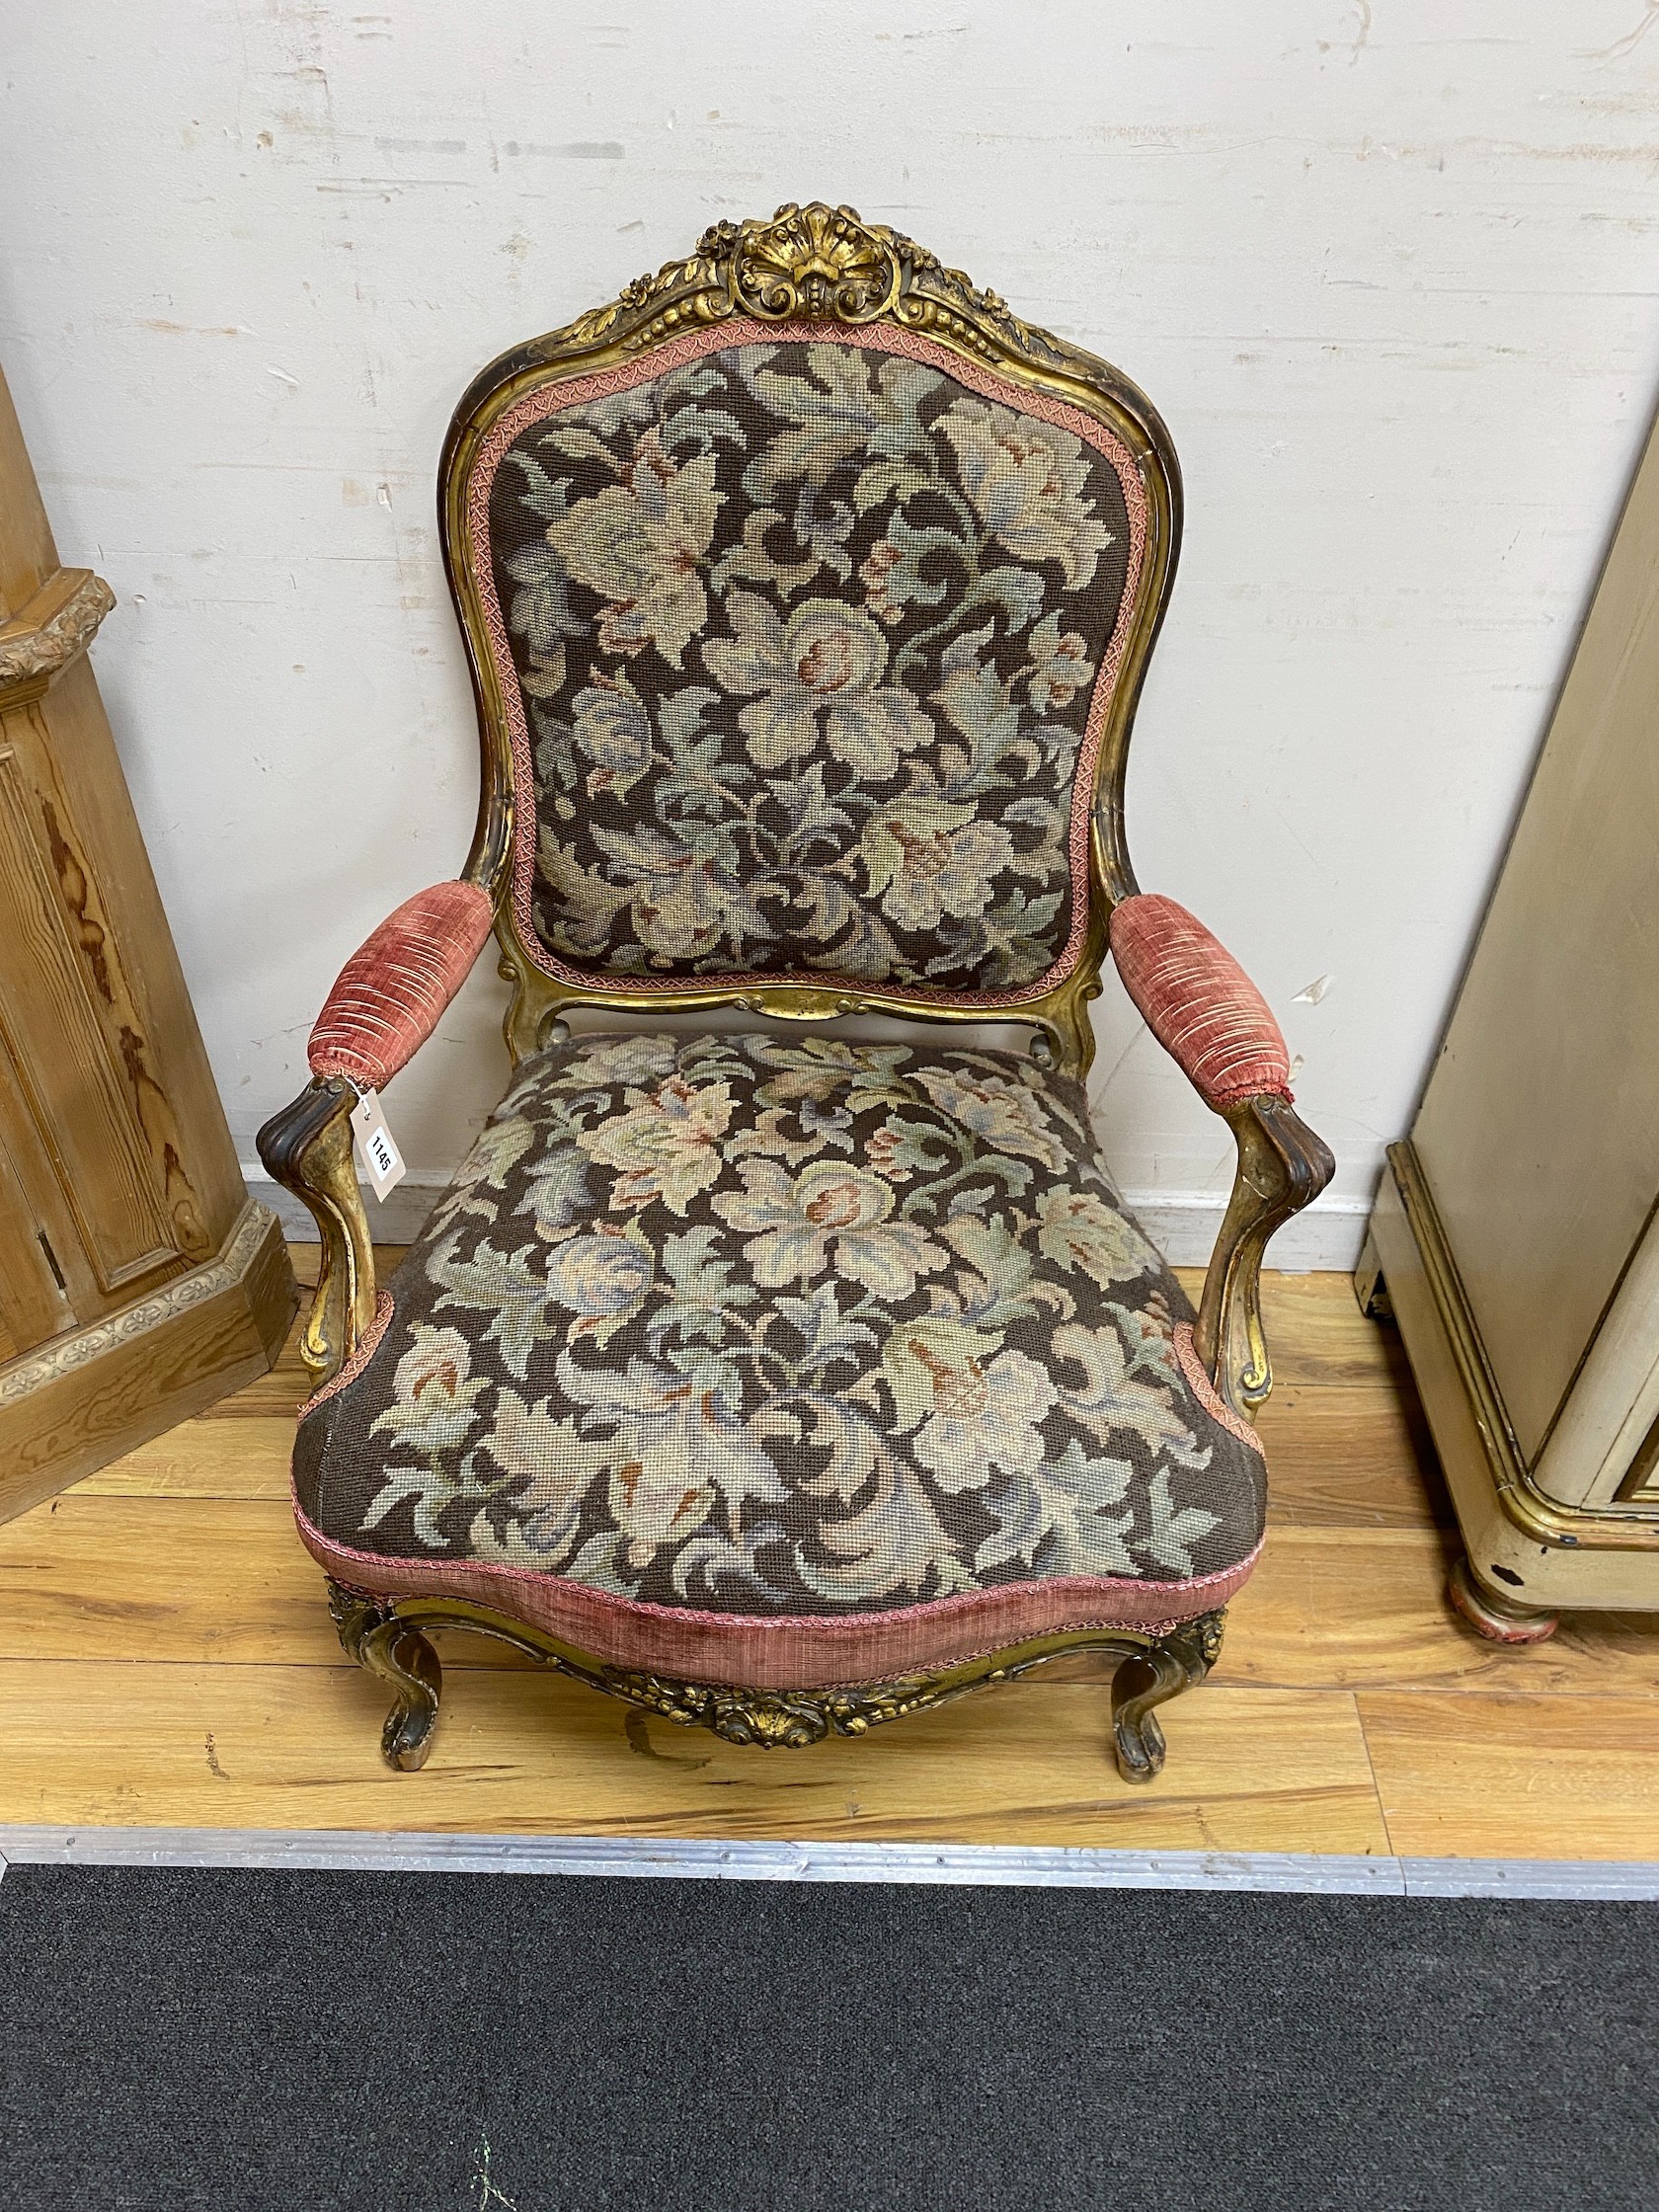 A 19th century French carved giltwood open armchair with floral tapestry upholstery, width 65cm, depth 66cm, height 96cm